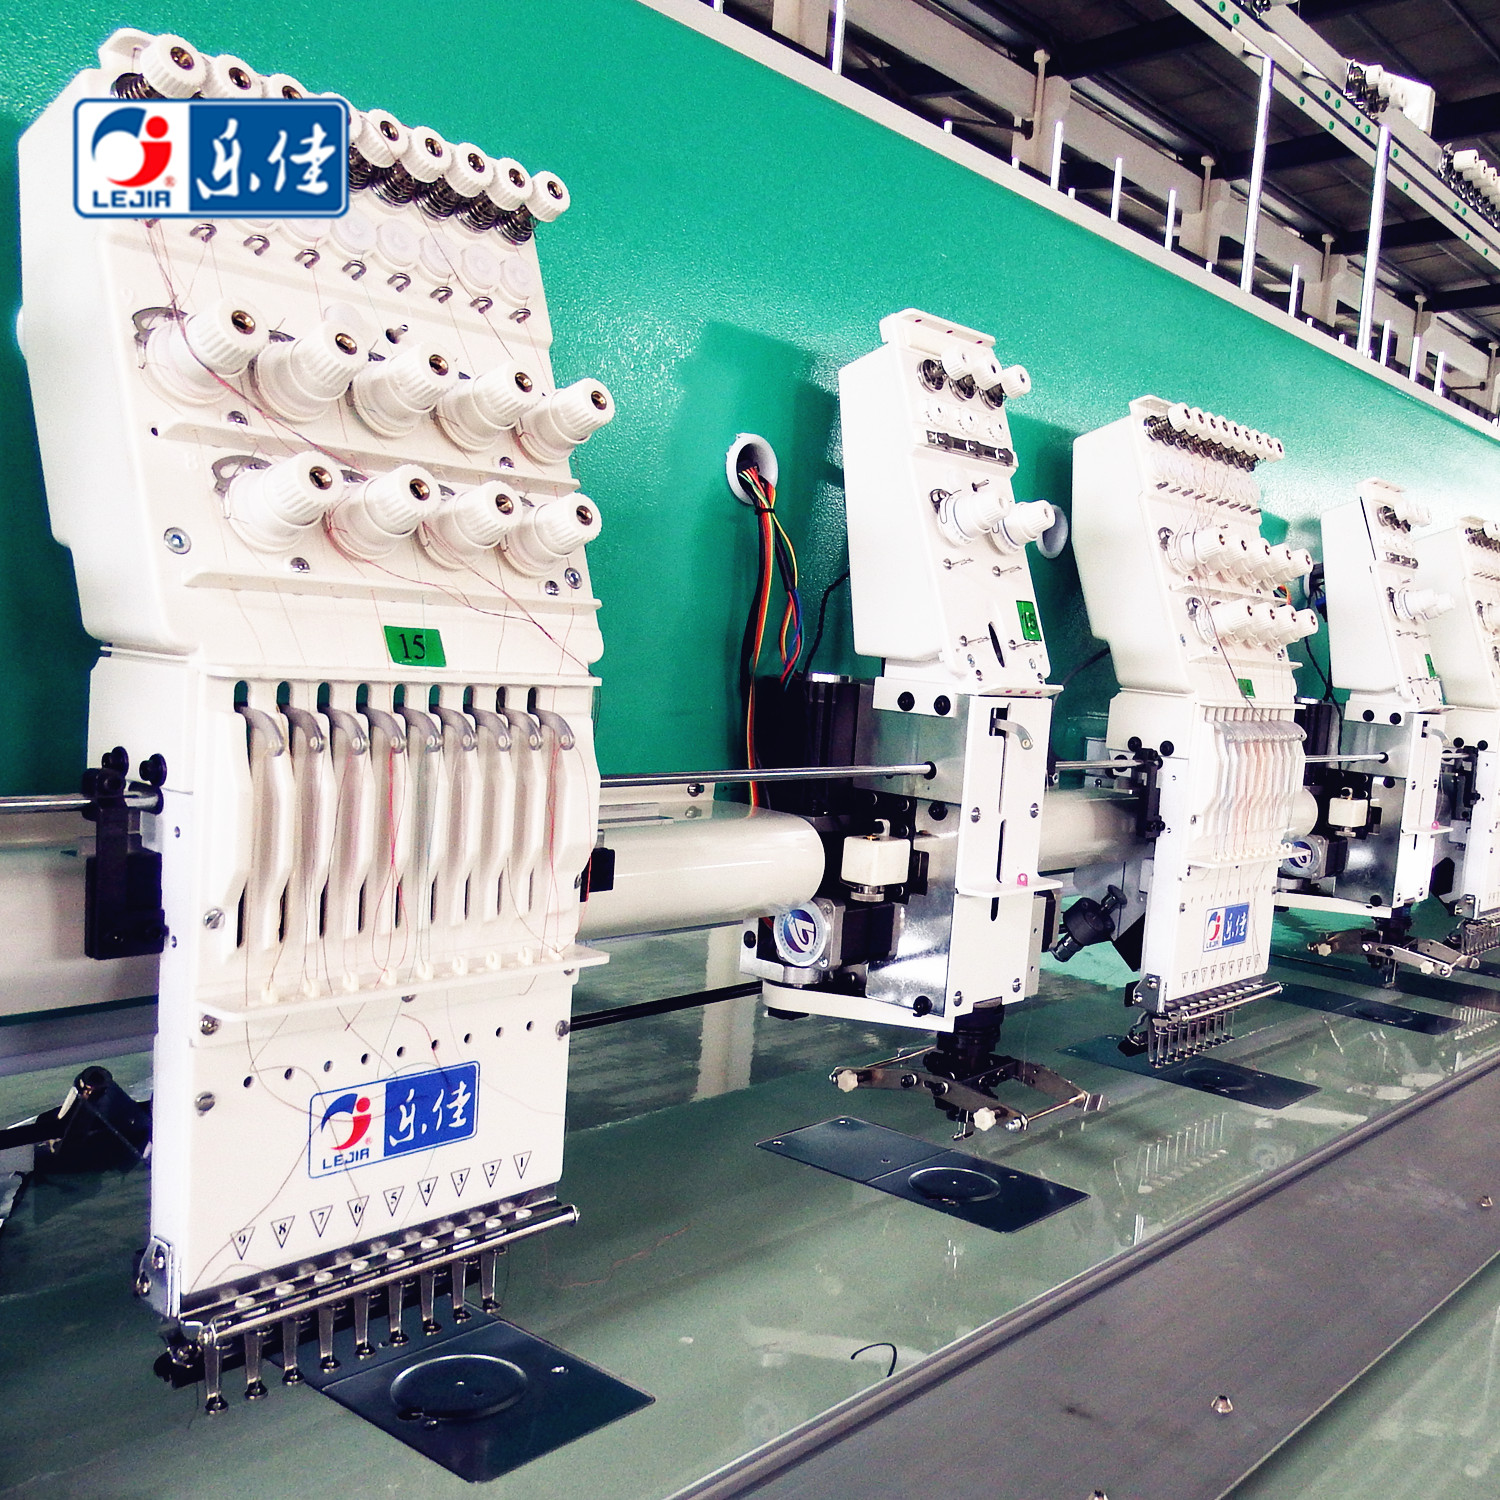 LEJIA 9 Needles 8 Heads High Speed Embroidery Machine, Coiling/Taping Mixed Embroidery Machine With Cheap Price